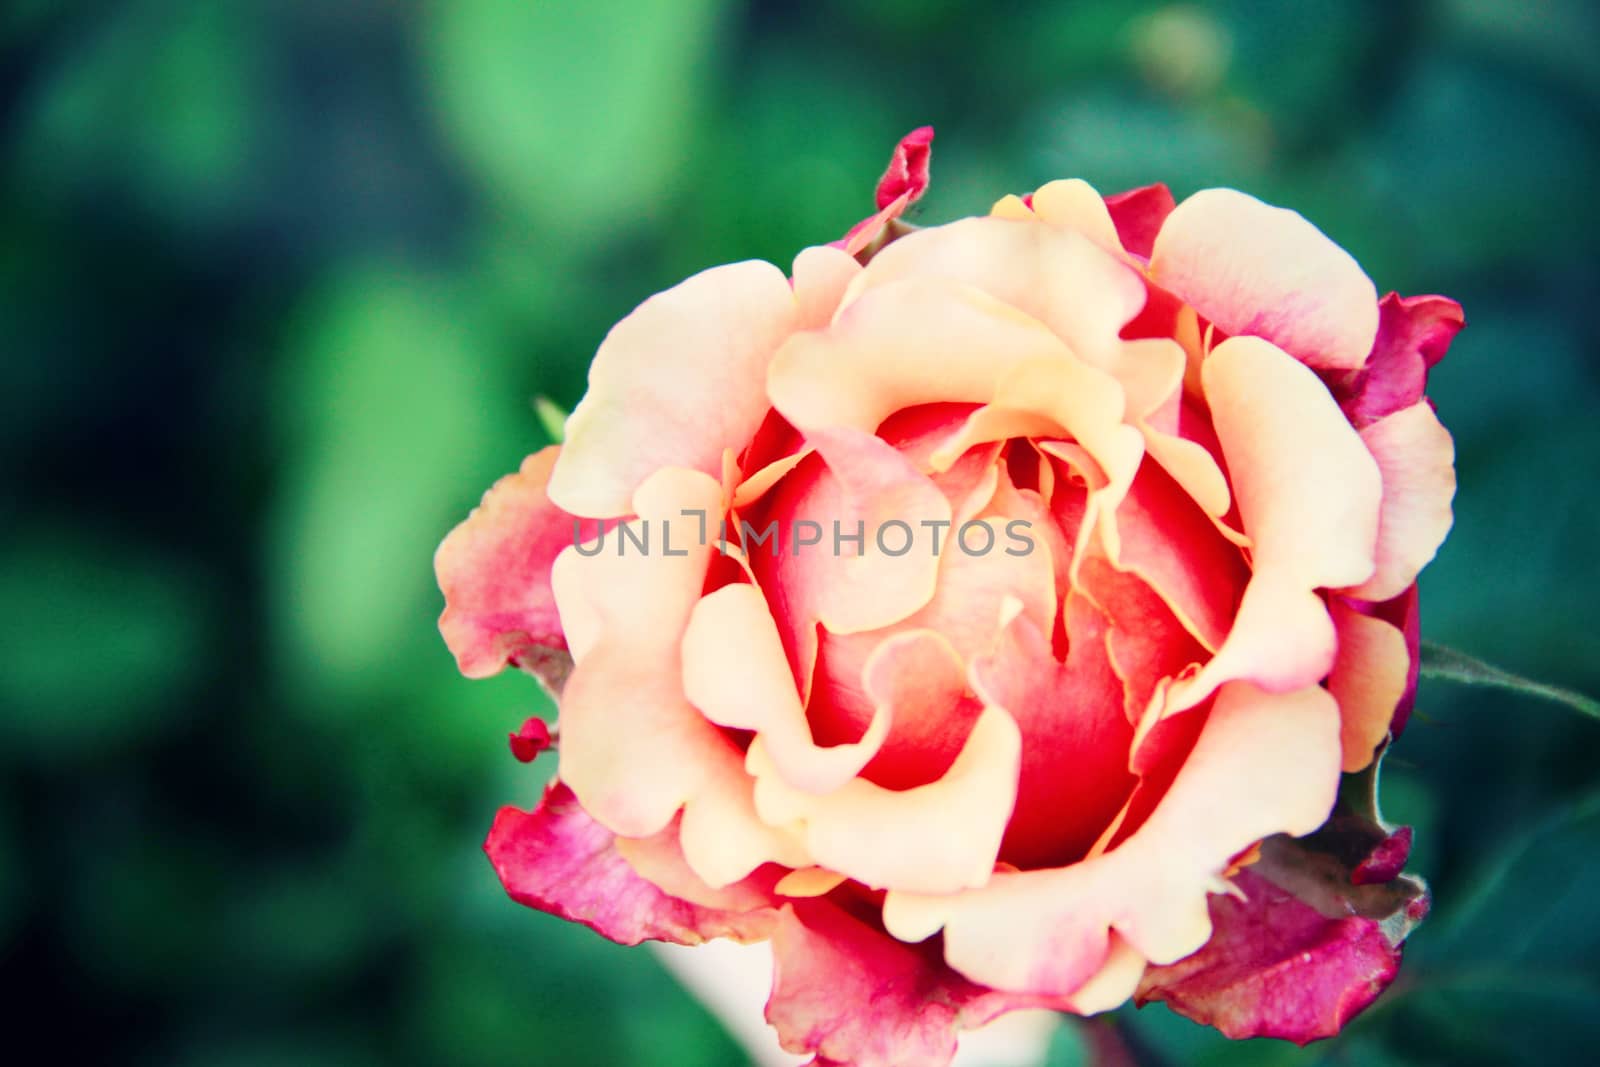 biautiful big red and yellow rose. photo. flowers spring